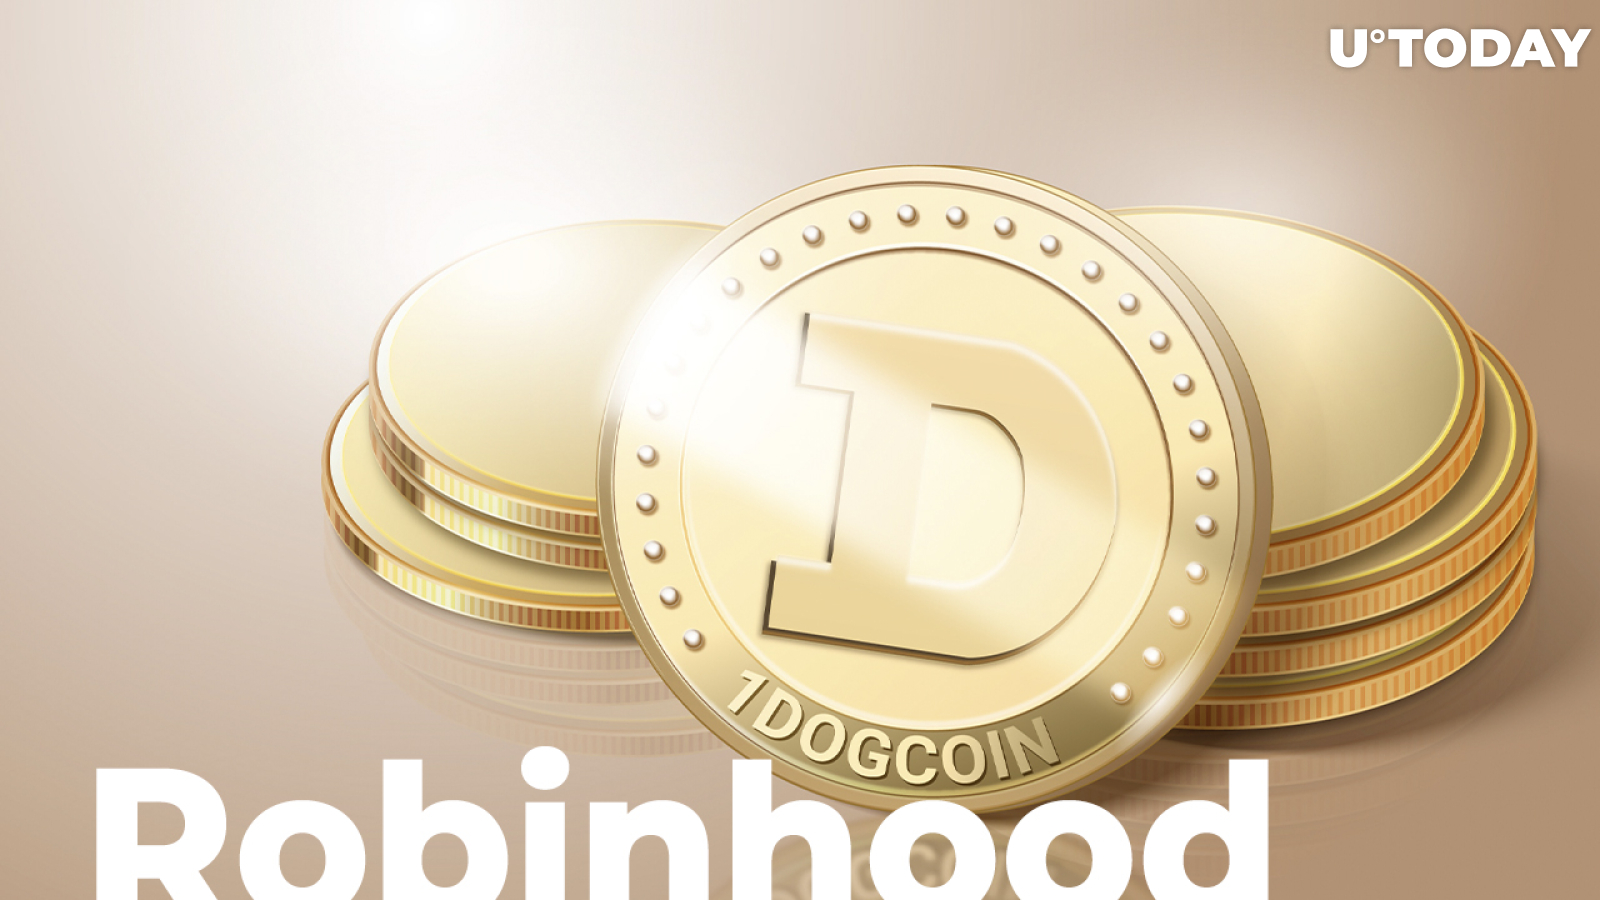 40.9 Billion DOGE Held by Robinhood - 30.9% of Coins in Circulation: Details